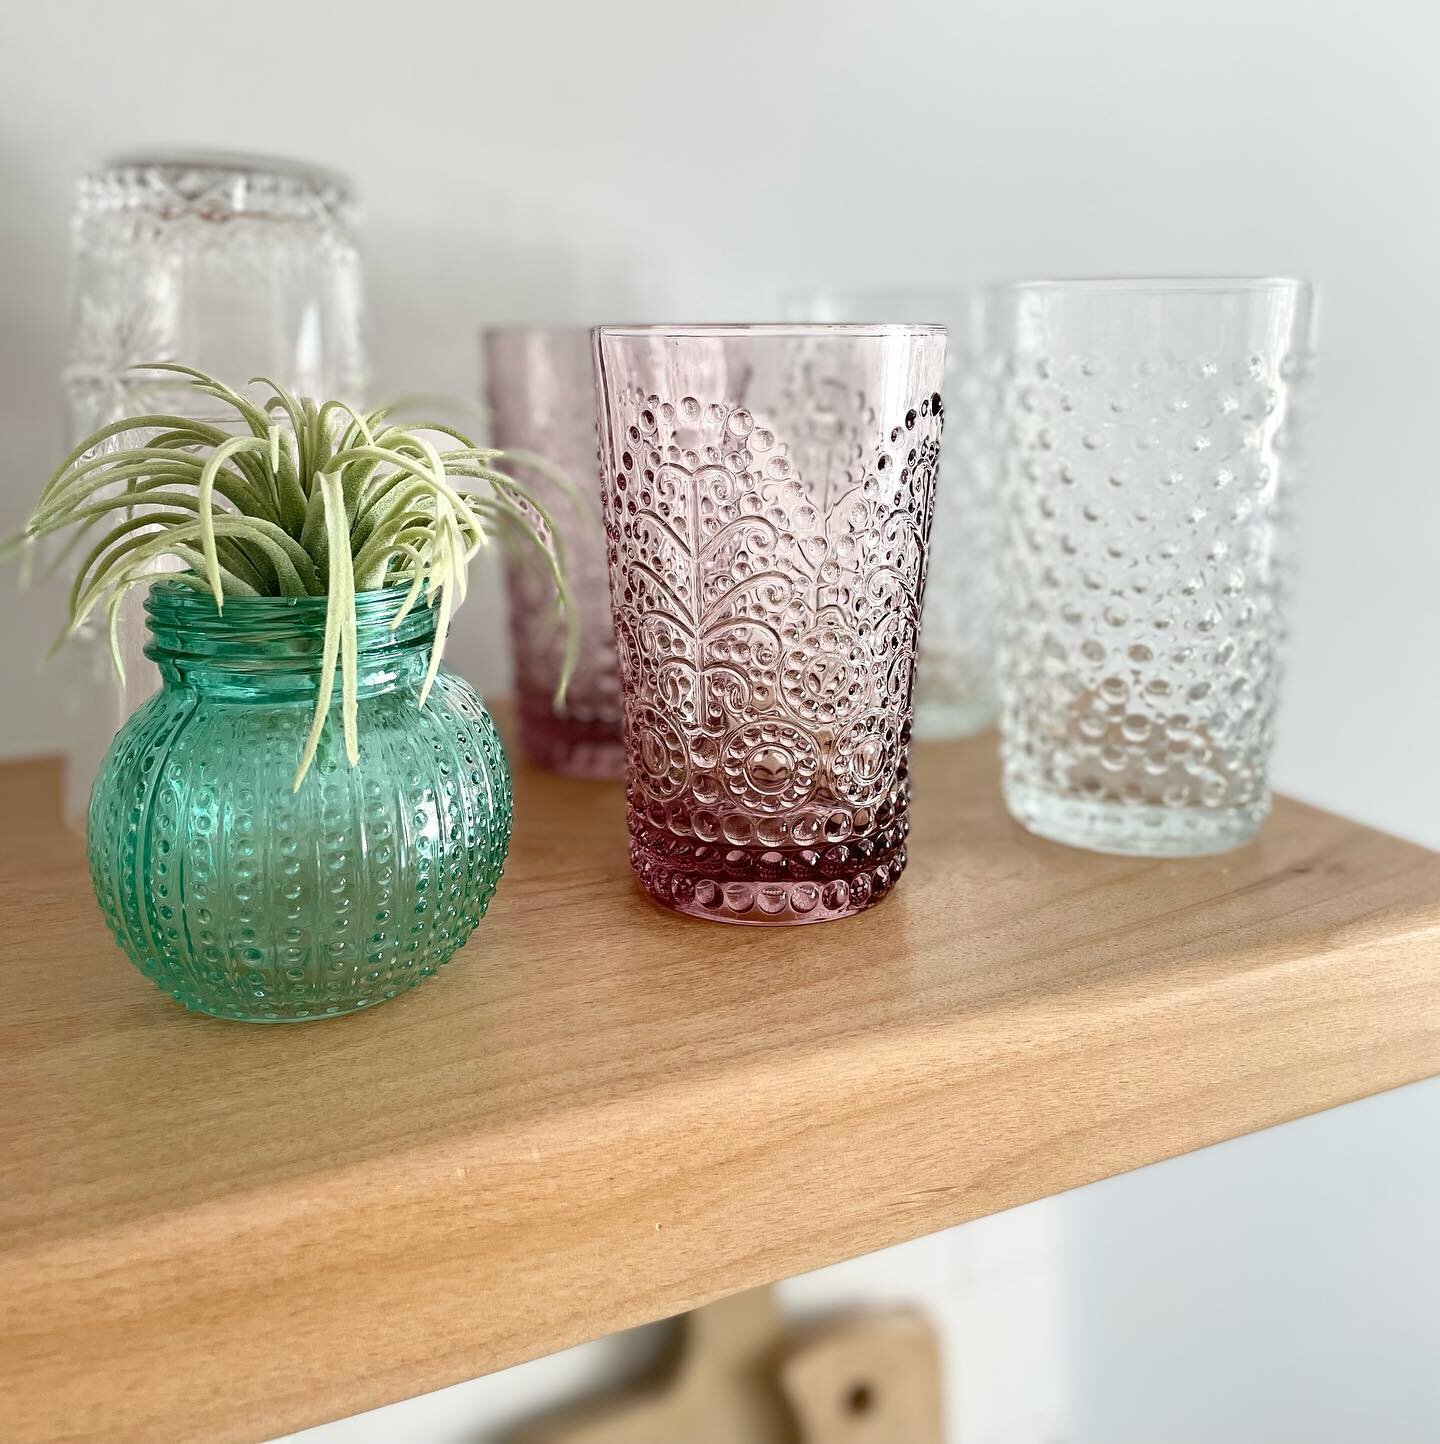 Always on the hunt for hobnail glasses and found these pink ones at the thrift for $1.09 each! 

#hobnail #thrift #thrifted #bubbleglass #pinkhobnail #pinkhobnailglass #thriftstorefinds